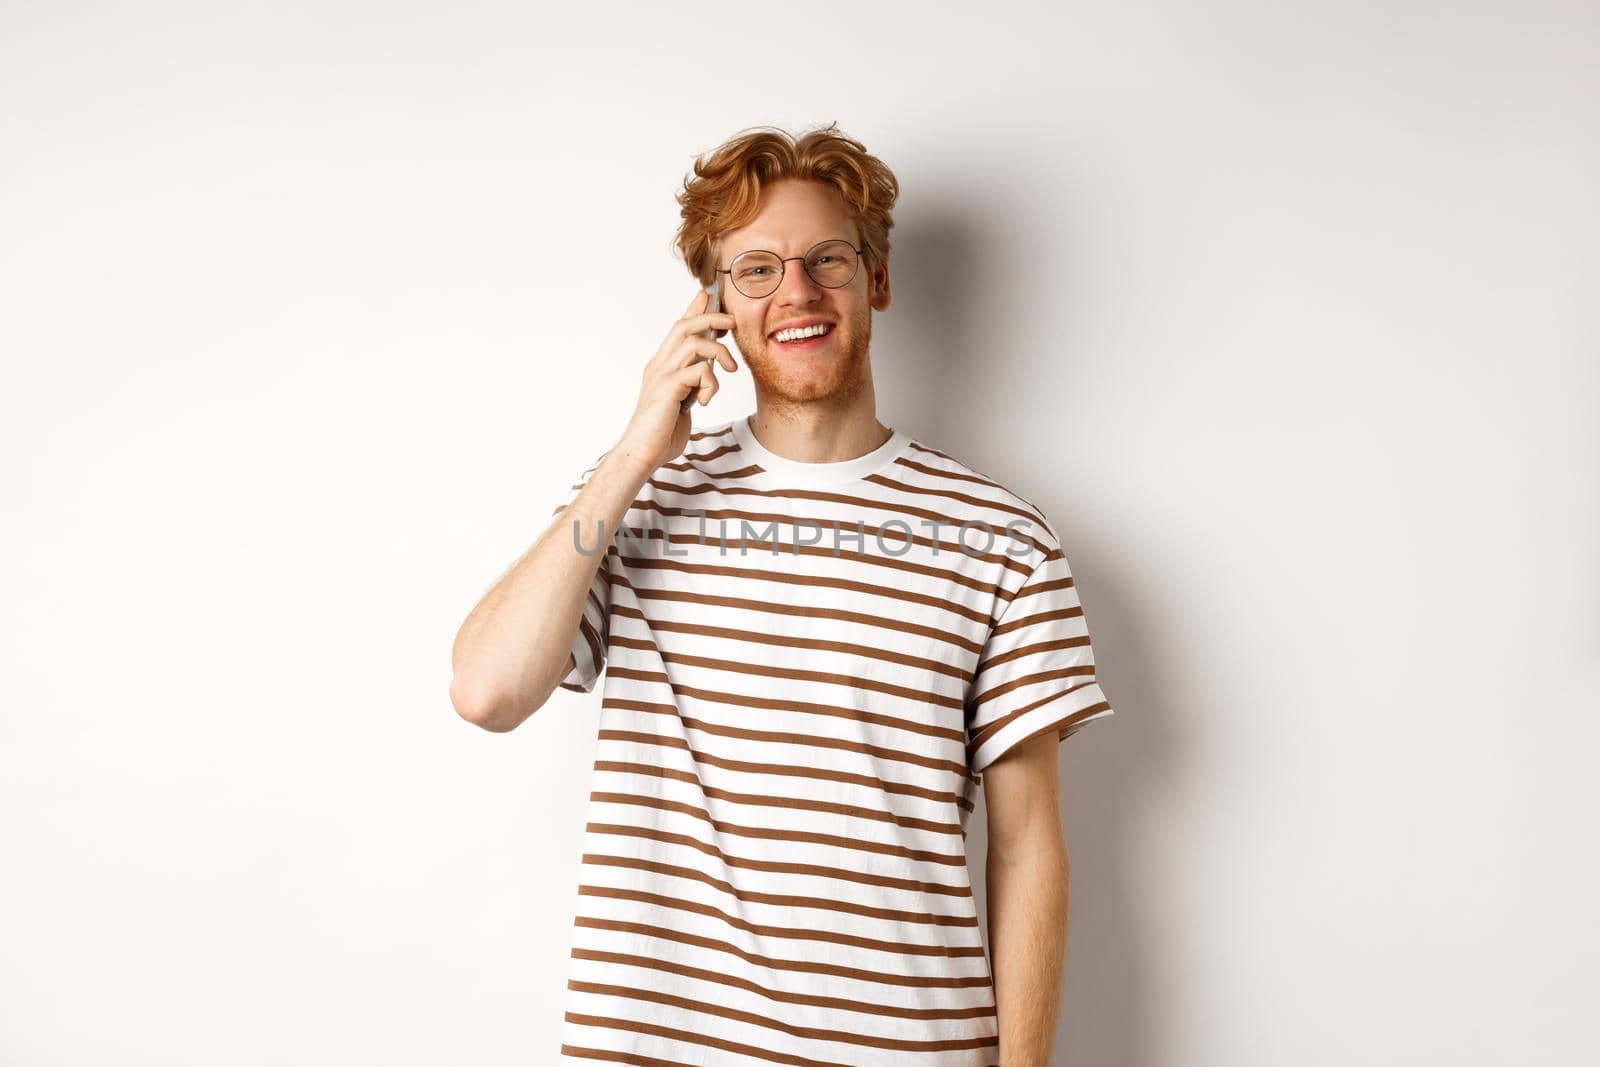 Hipster with red hair and glasses talking on mobile phone, smiling during conversation, white background.